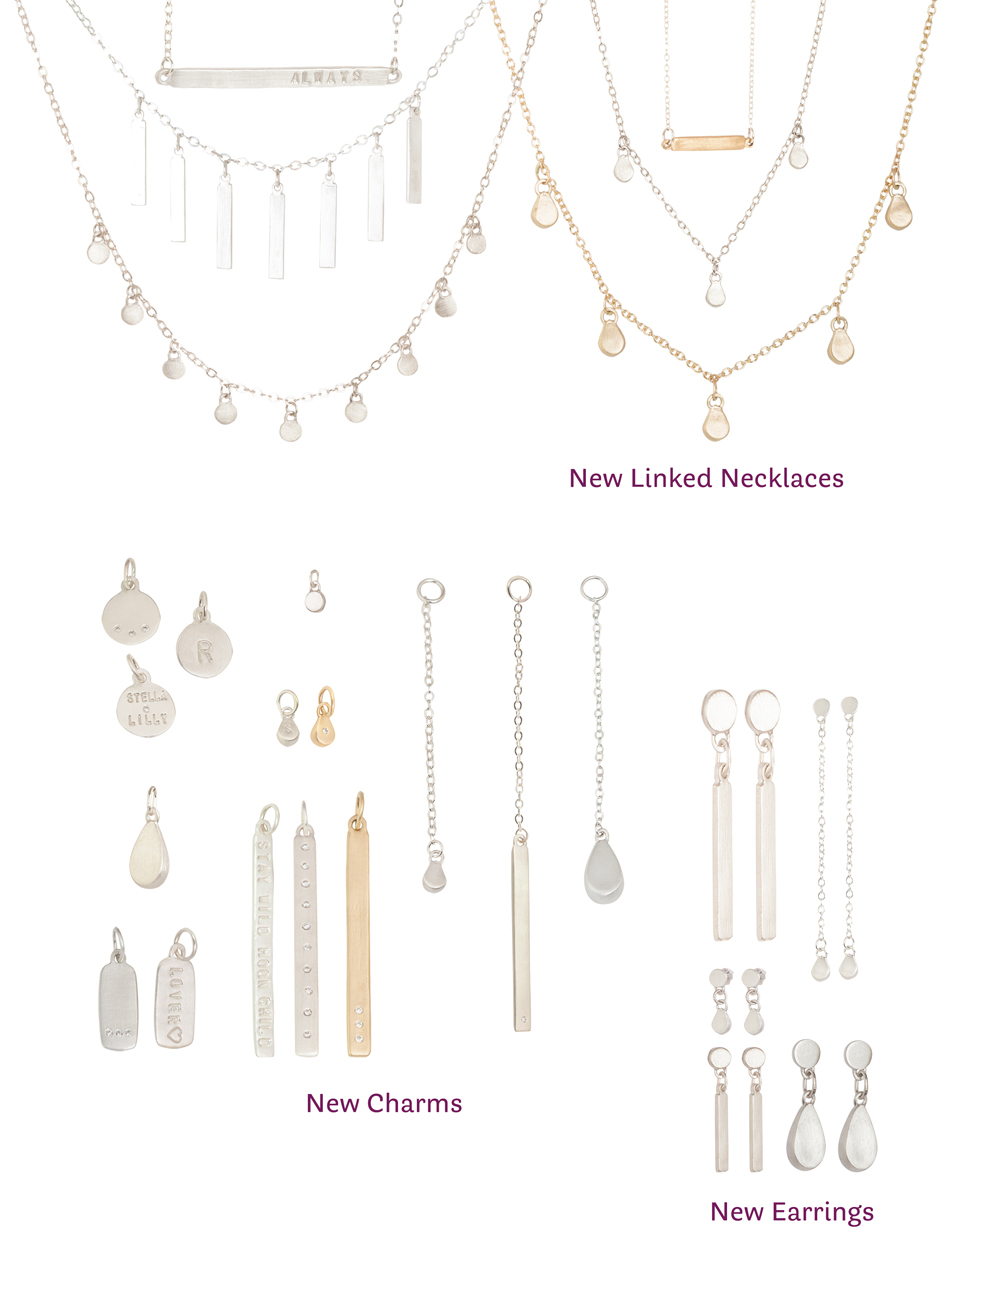 Jewelry by Cari New Charms, Linked Necklaces and Earrings